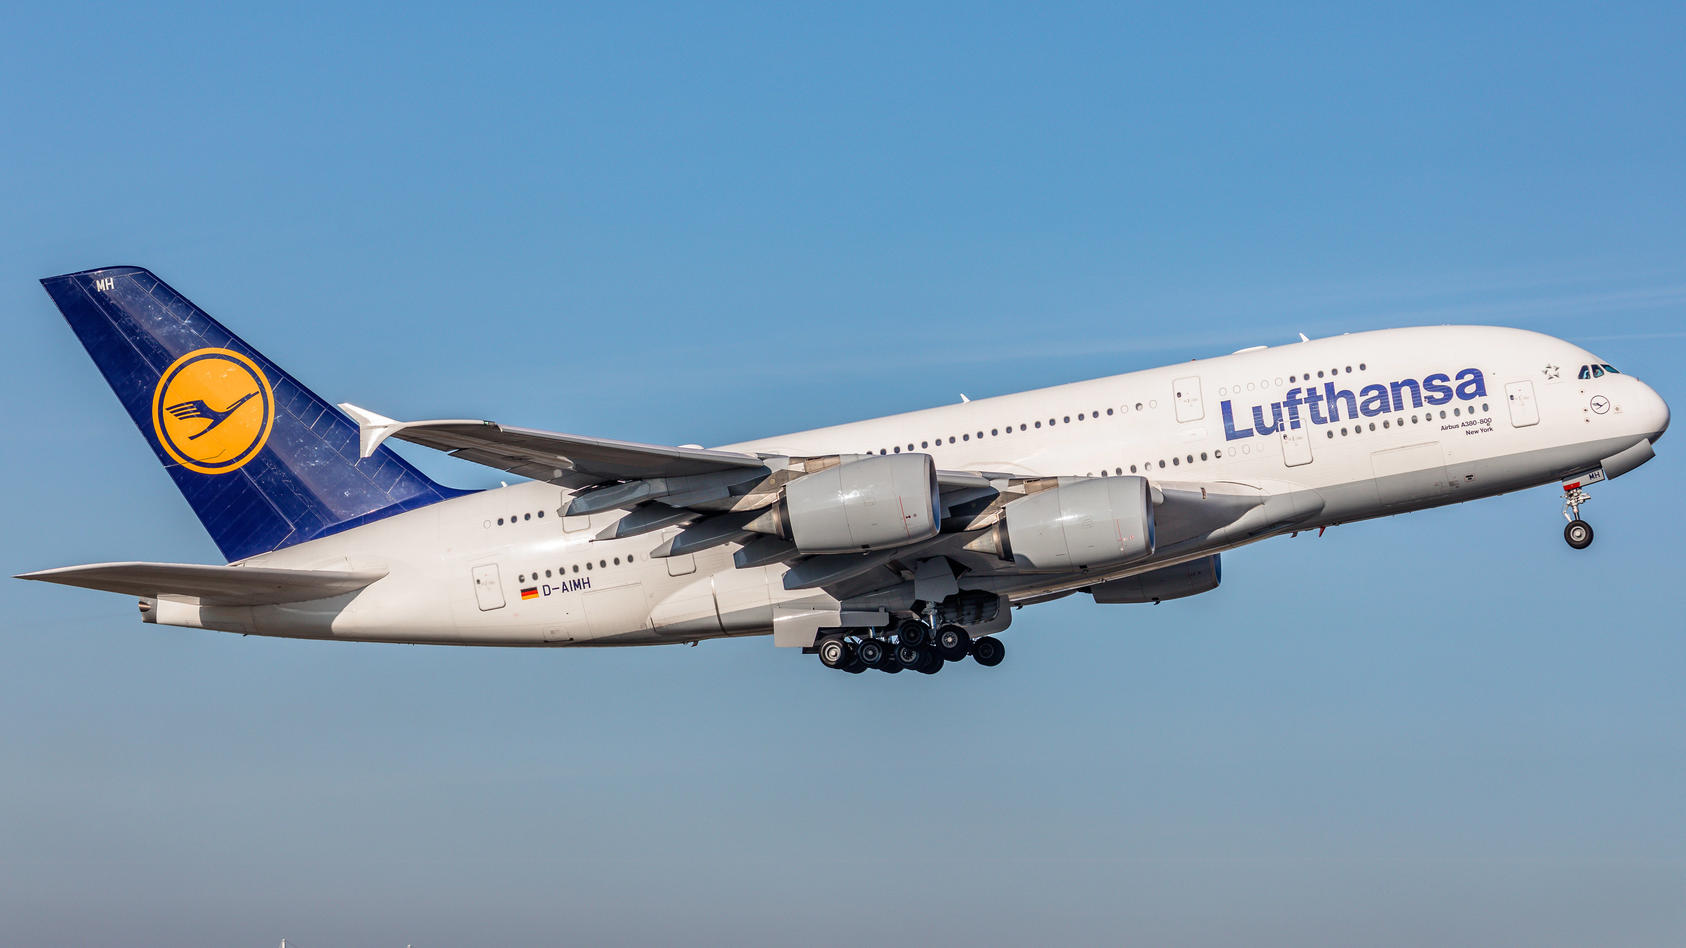  Munich, Germany - December 12, 2019: An Airbus A380-841 from Lufthansa takes off from Munich Airport. The aircraft with registration D-AIMH has been in service for the German airline since July 2011. Luftverkehr 